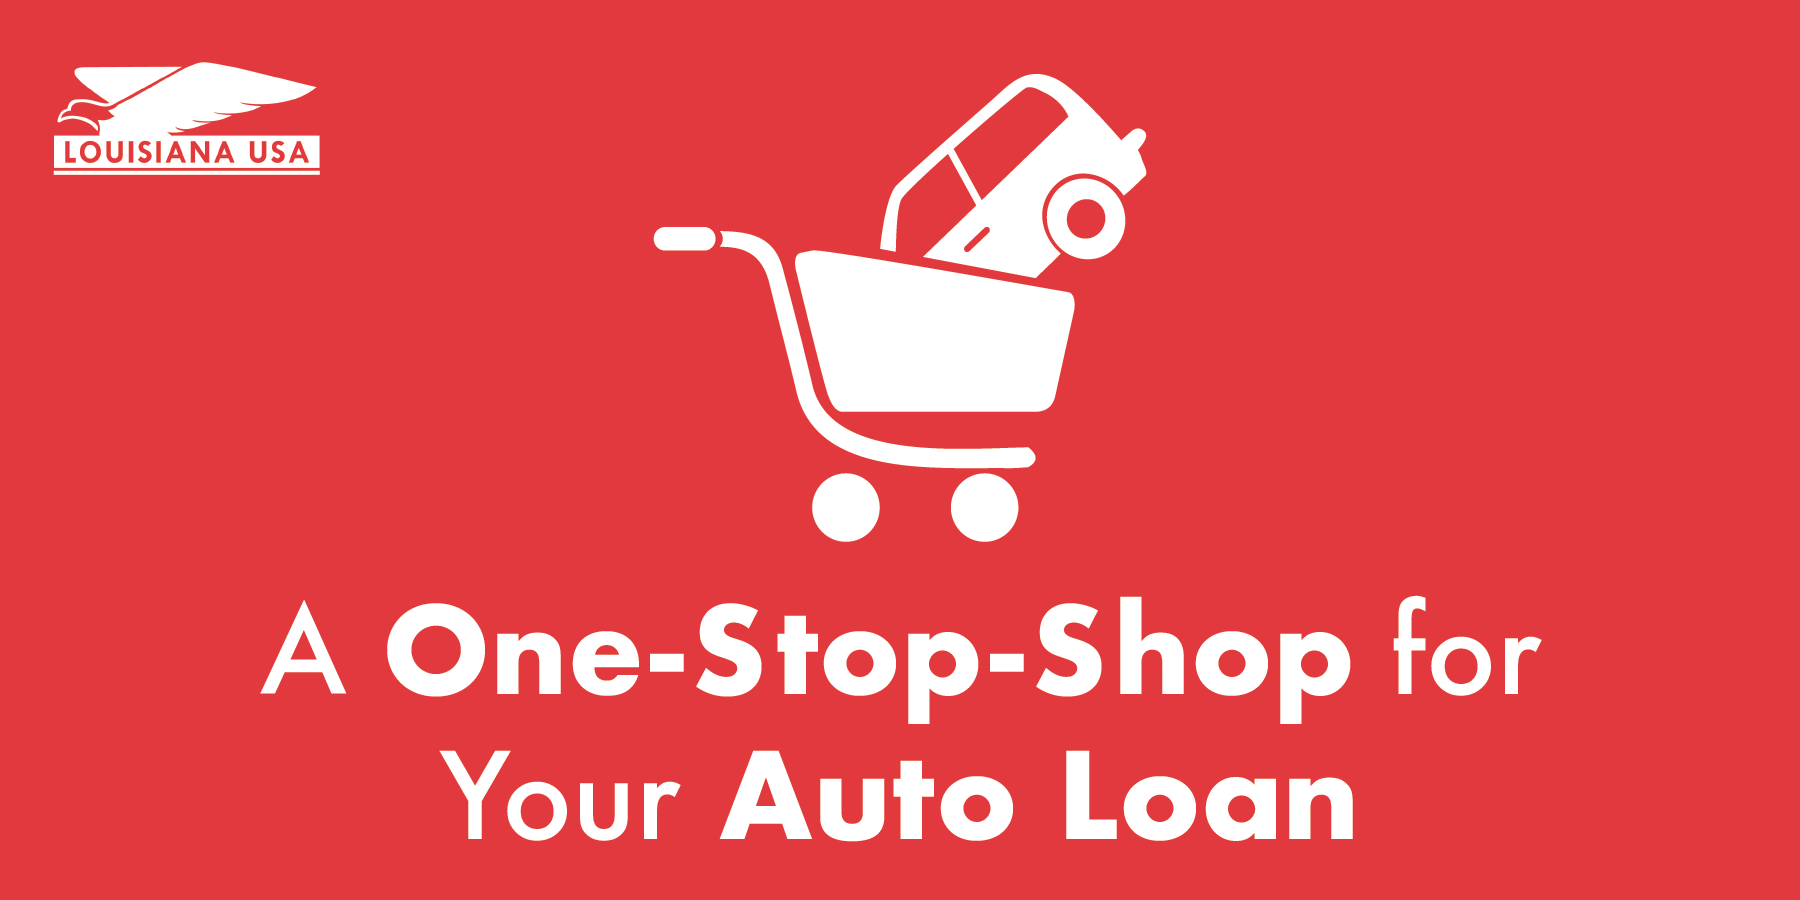 A One-Stop-Shop For Your Auto Loan